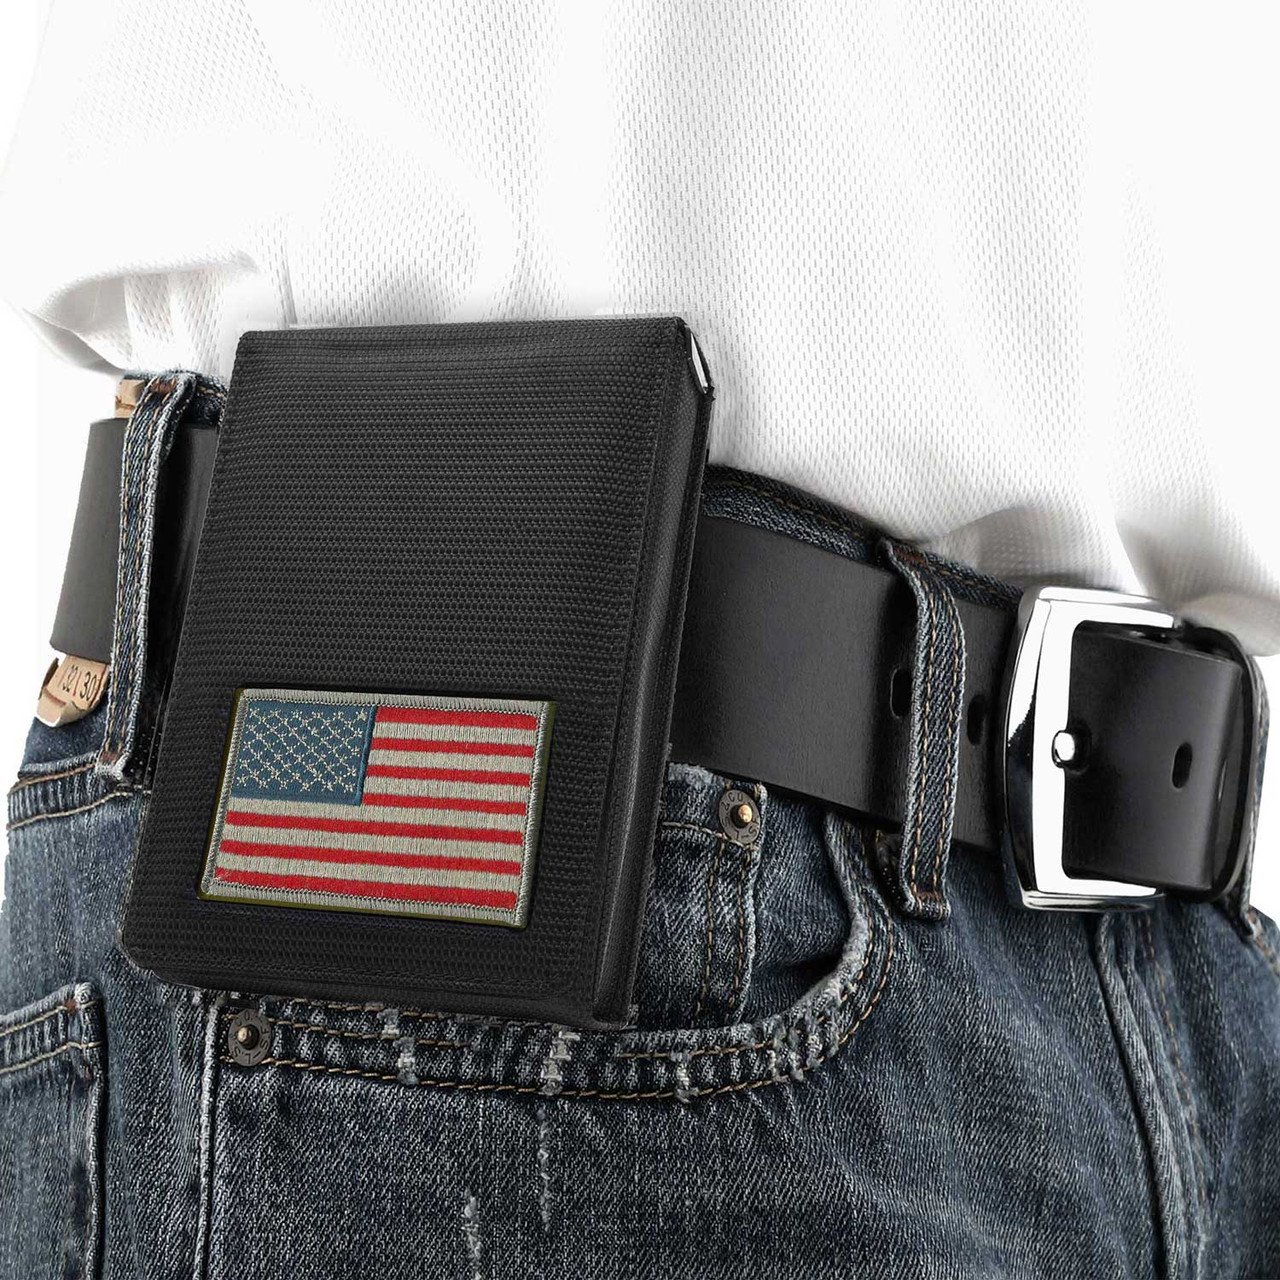 American Pride Tactical Holster for the Glock 32